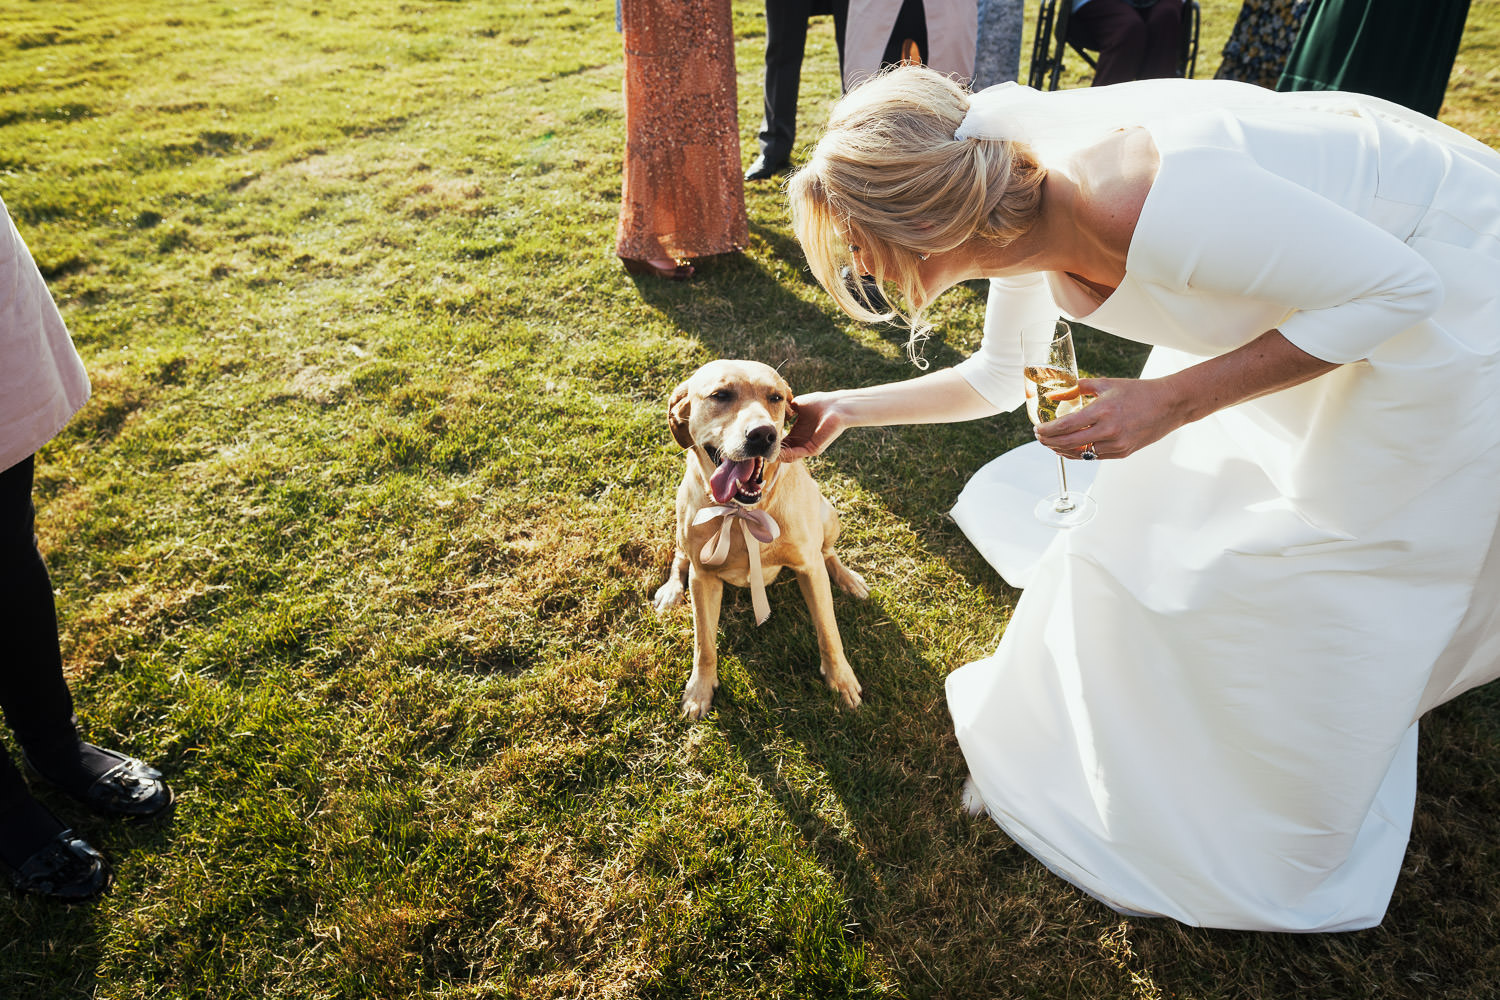 A dog wearing a ribbon is fussed by her owner who is wearing a wedding dress.